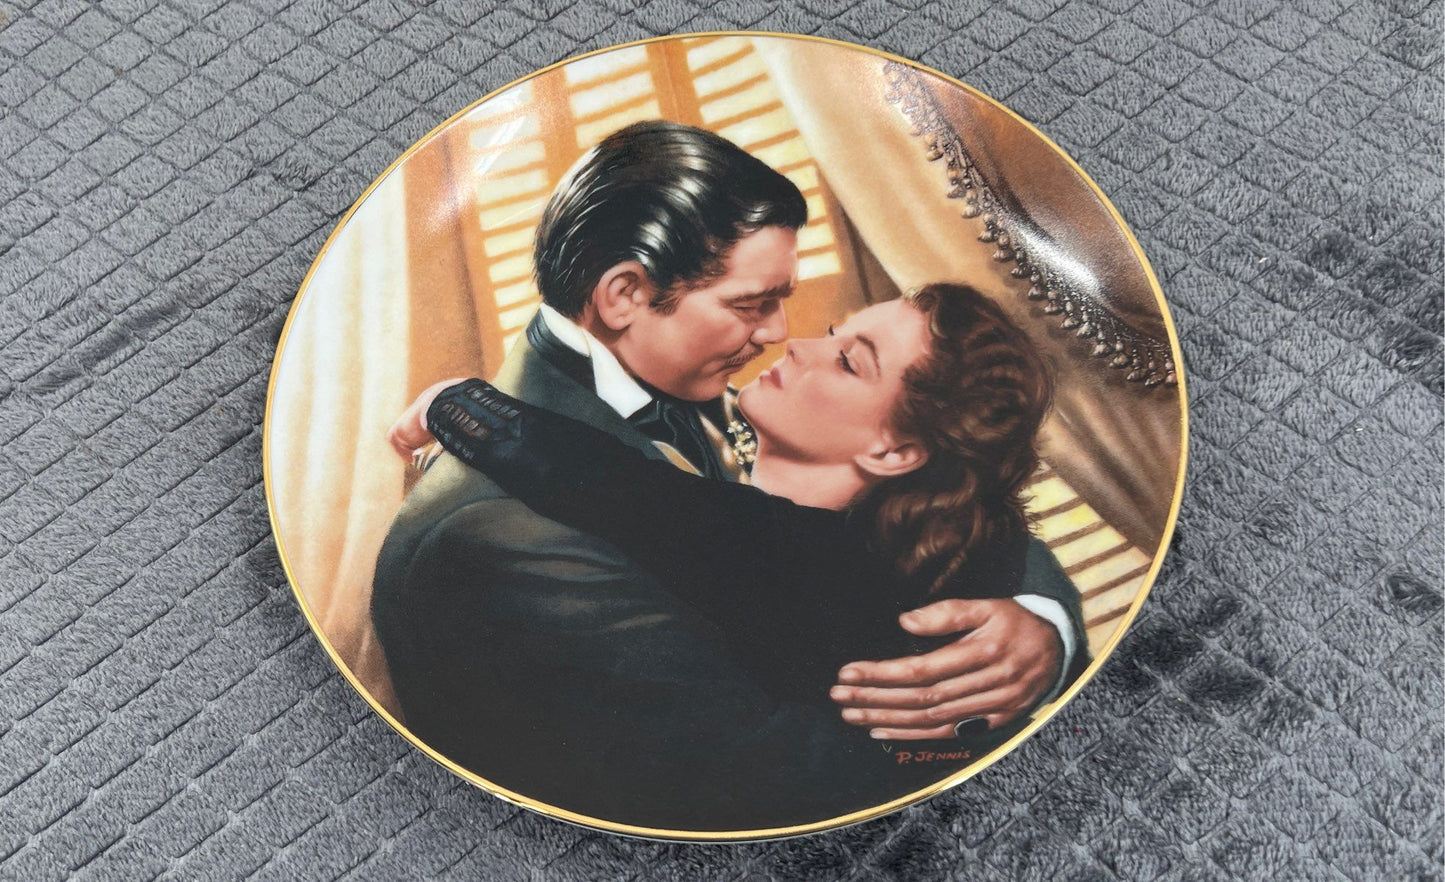 Gone With The Wind "Marry Me Scarlett!" Plate By Paul Jennis-Original Box-COA